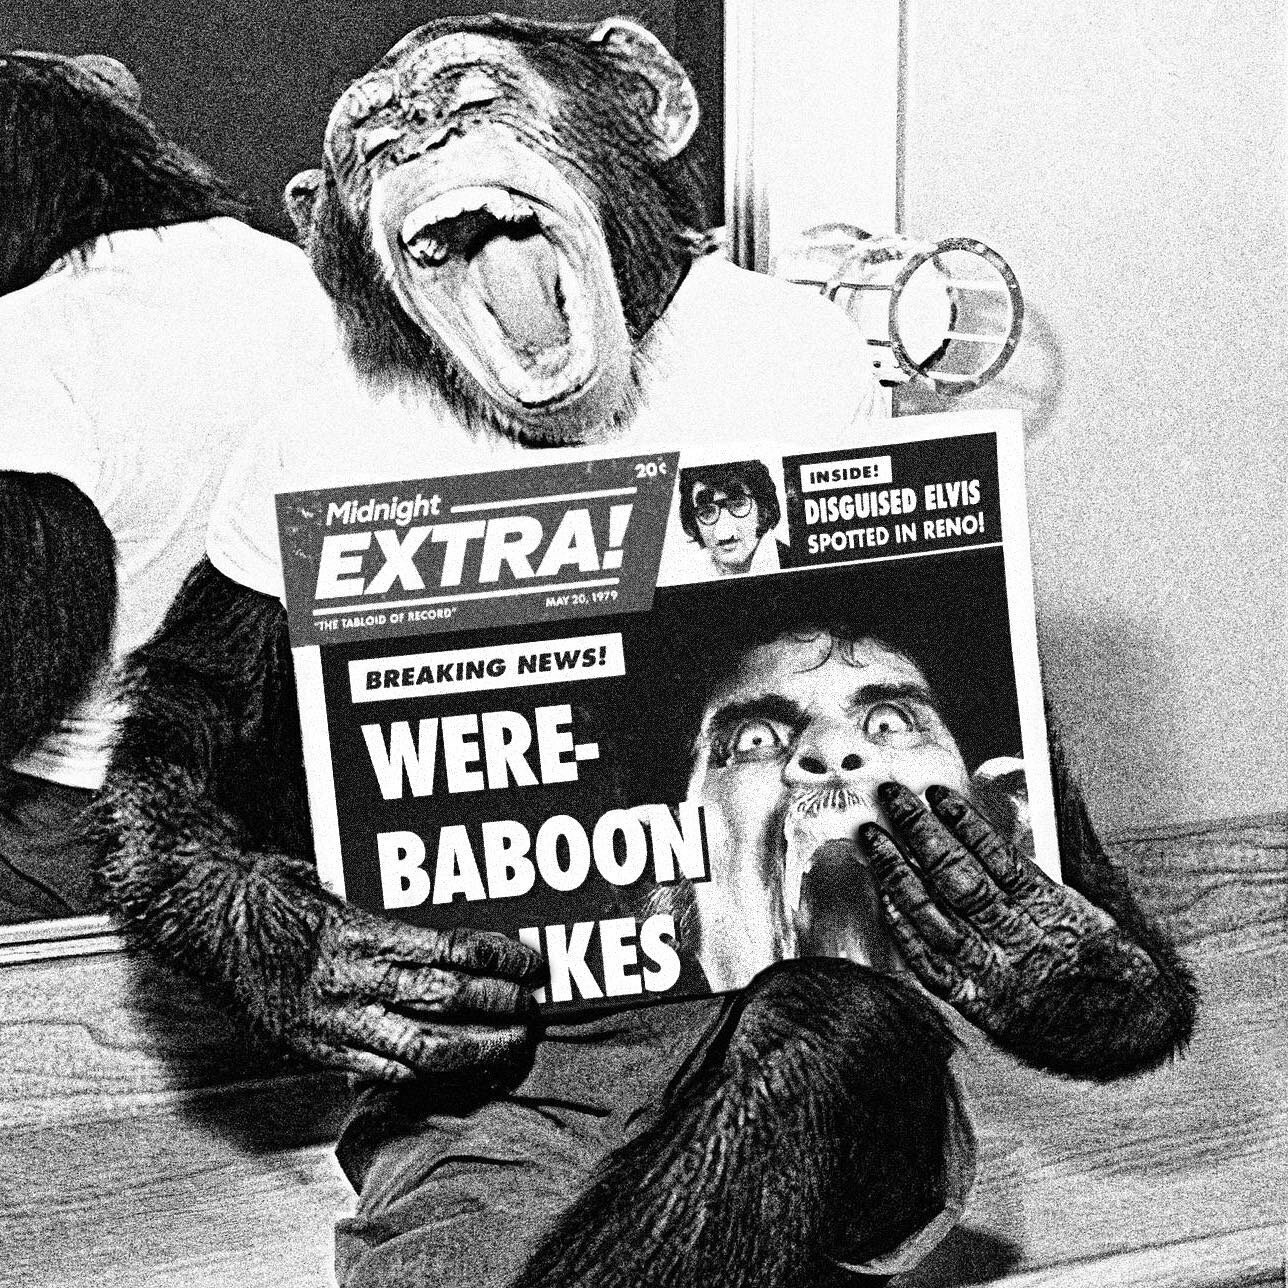 1979: The BLOOD FEUD between apes and monkeys REIGNITES upon the publication of our WERE-BABOON expos&eacute;! Facing RIDICULE and SCORN from the chimpanzees, the EVER-VENGEFUL baboons promise SWIFT RETALIATION! The Midnight Extra takes NO RESPONSIBI